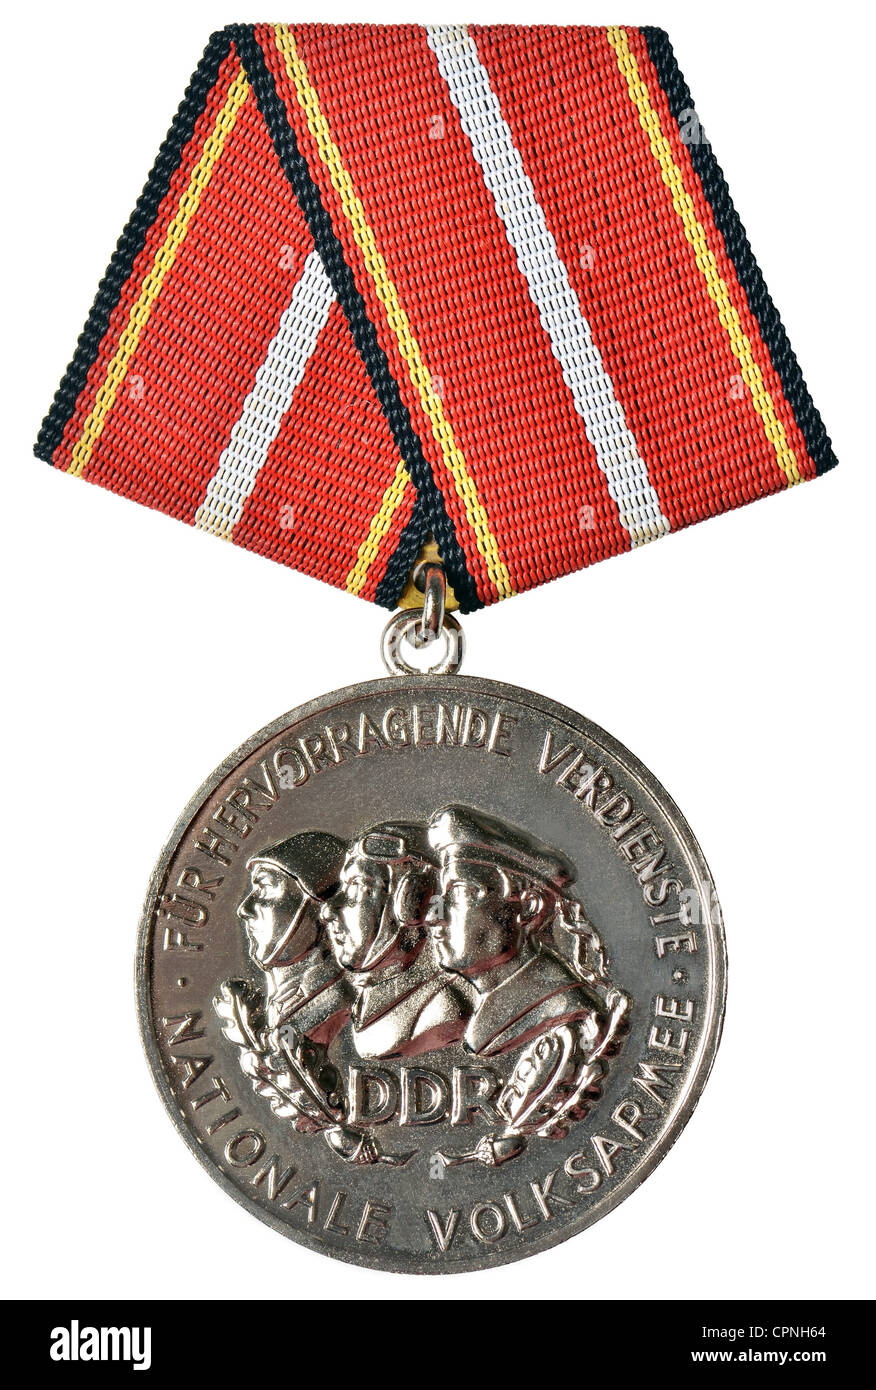 medals and badges,medal for merit of the national people's army,rank silver,founded 1956,was awarded for eminent merit and personal operational readiness during of the increase of the combat strength and readiness for action of the national people's army,portraying soldiers of the three armed service,East-Germany,circa 1965,medal at band,decoration,decorations,silvering,ground forces,land forces,naval forces,air force,military,National People's Army,army,armies,still,clipping,cut out,cut-out,cut-outs,1960s,60s,armed forces,Medal for ,Additional-Rights-Clearences-Not Available Stock Photo